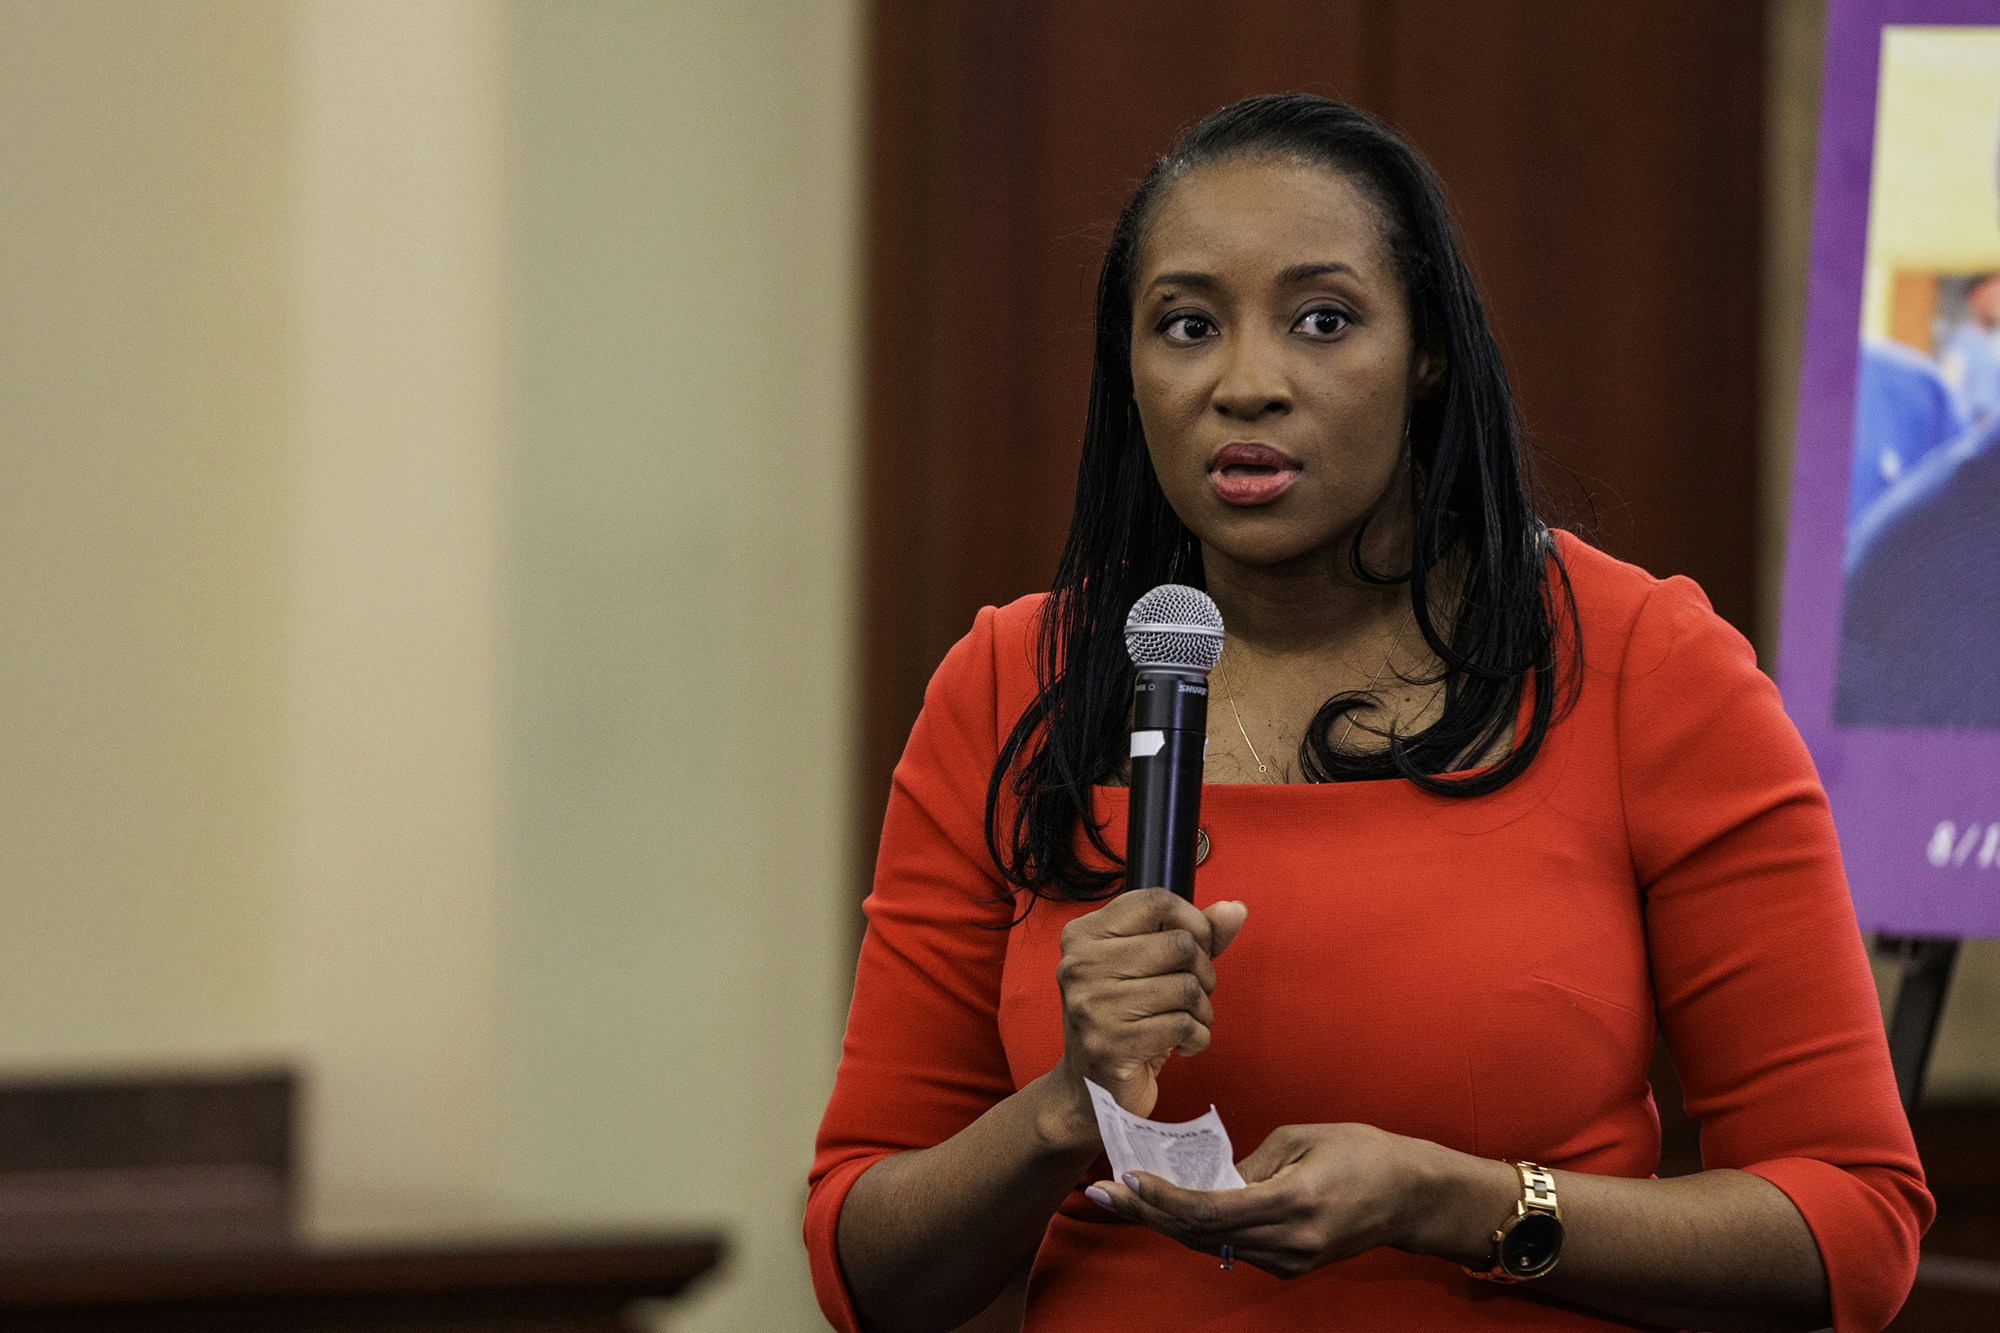 Patrice Onwuka, director of the Center for Economic Opportunity at the Forum of Independent Women, speaks during an event hosted by Congressional Republicans on March 1, 2022 in Washington, D.C.